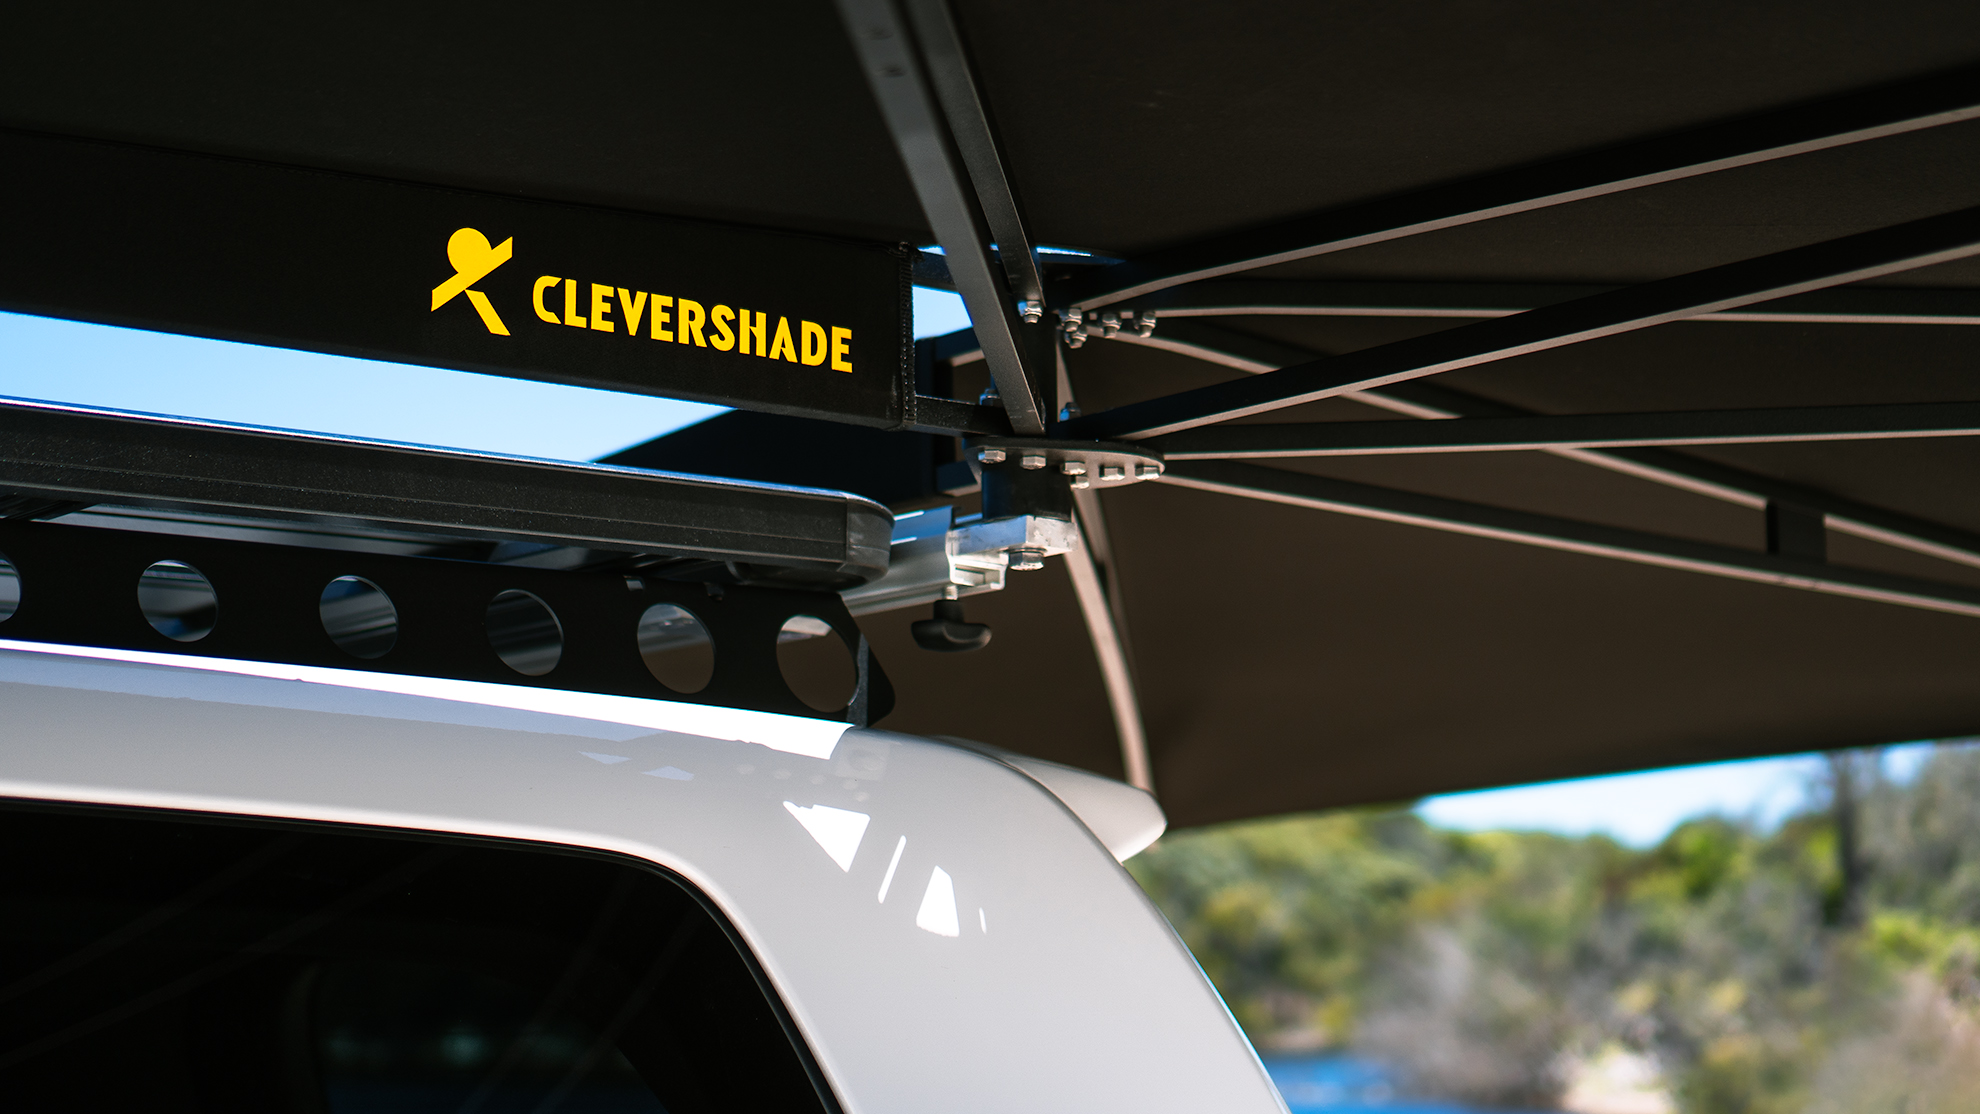 Clevershade 4x4 awning